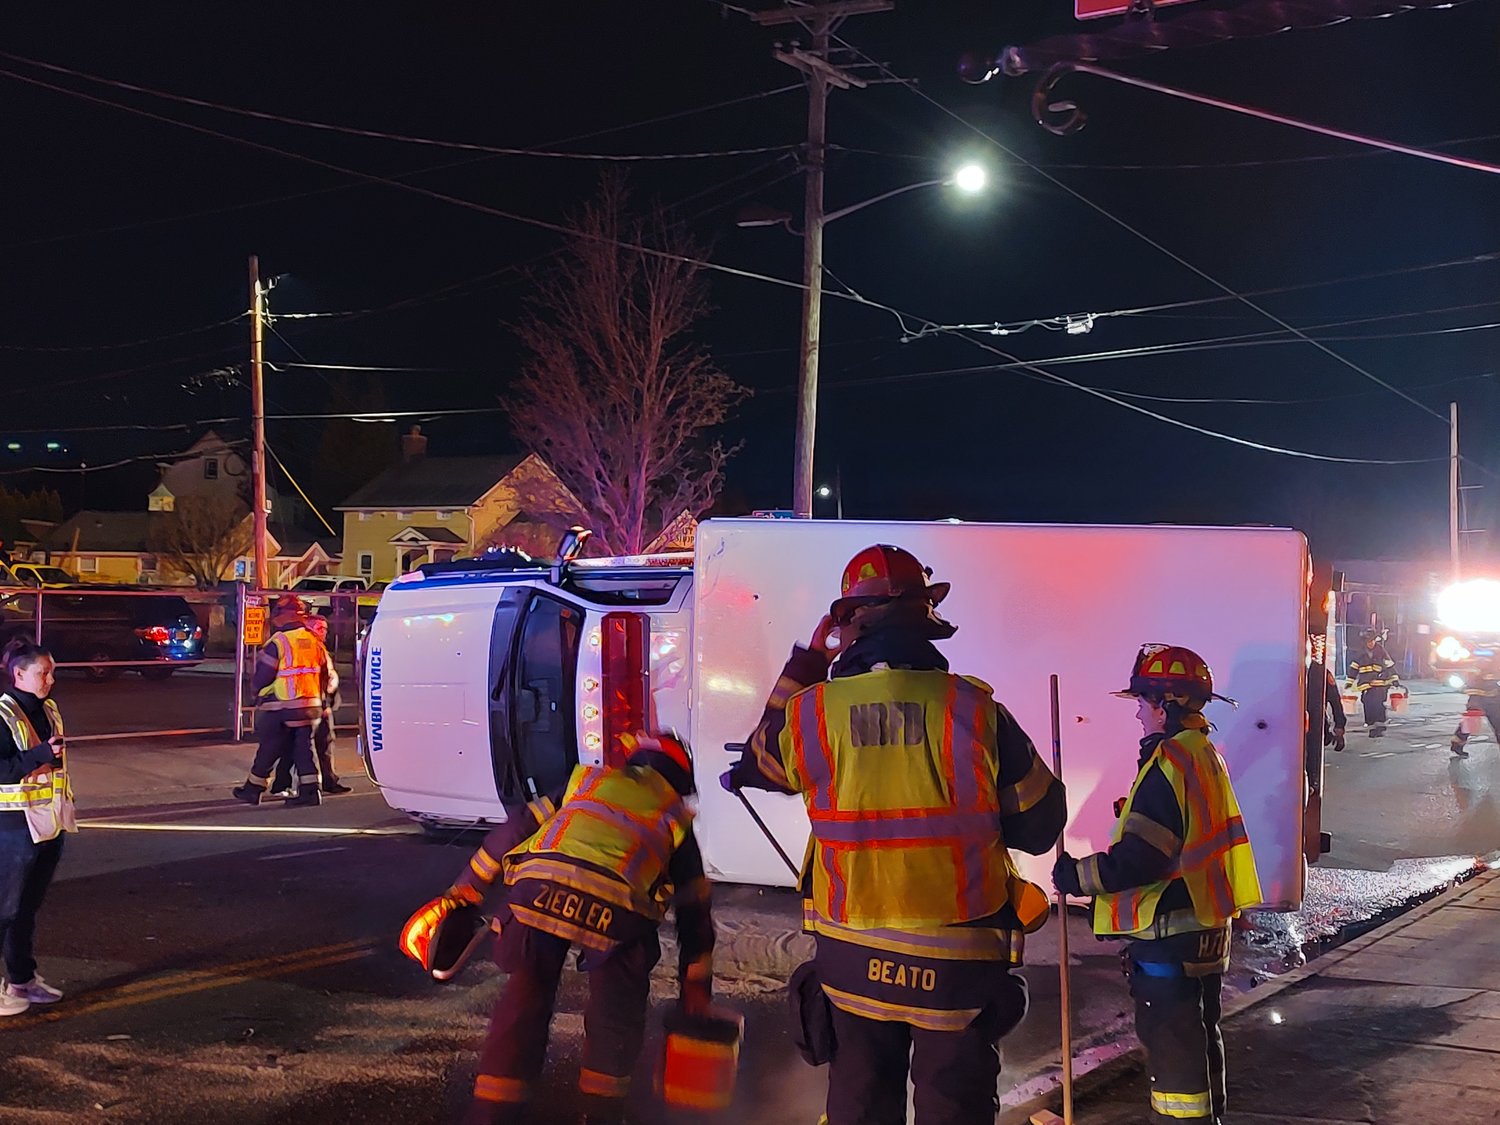 Emergency services responded to an overturned ambulance early Saturday morning. The accident occurred at the intersection of Newbridge Road and Camp Avenue, just down the road from Mepham High School.